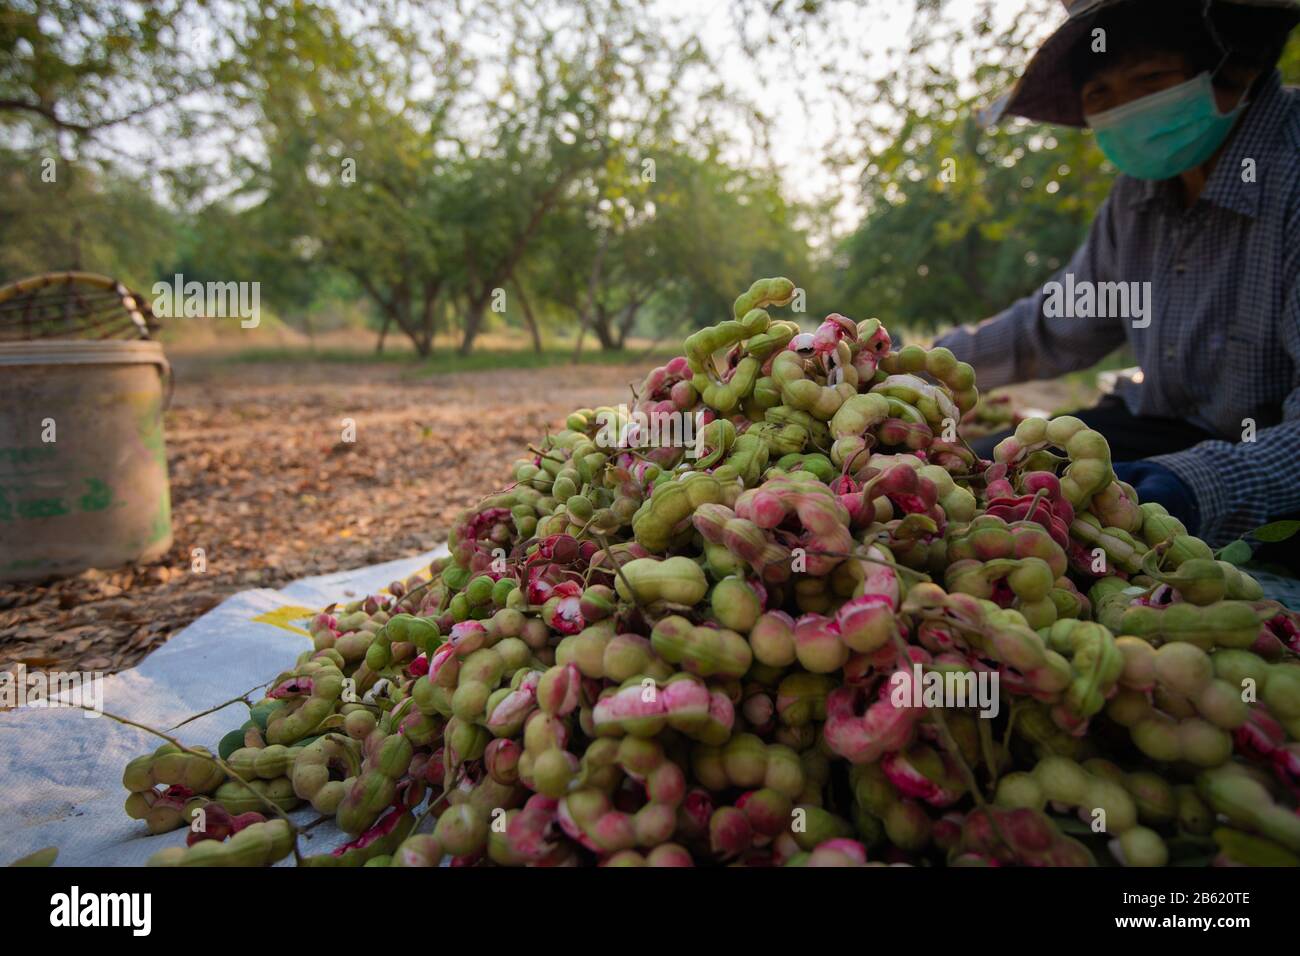 March 1, 2020, Ratchaburi, Thailand: A farmer sorts harvested pithecellobium dulce fruits at their plantation in Ratchaburi..The harvest of the Pithecellobium dulce also known as Madras Thorn is from December to March. (Credit Image: © Vachira Kalong/SOPA Images via ZUMA Wire) Stock Photo